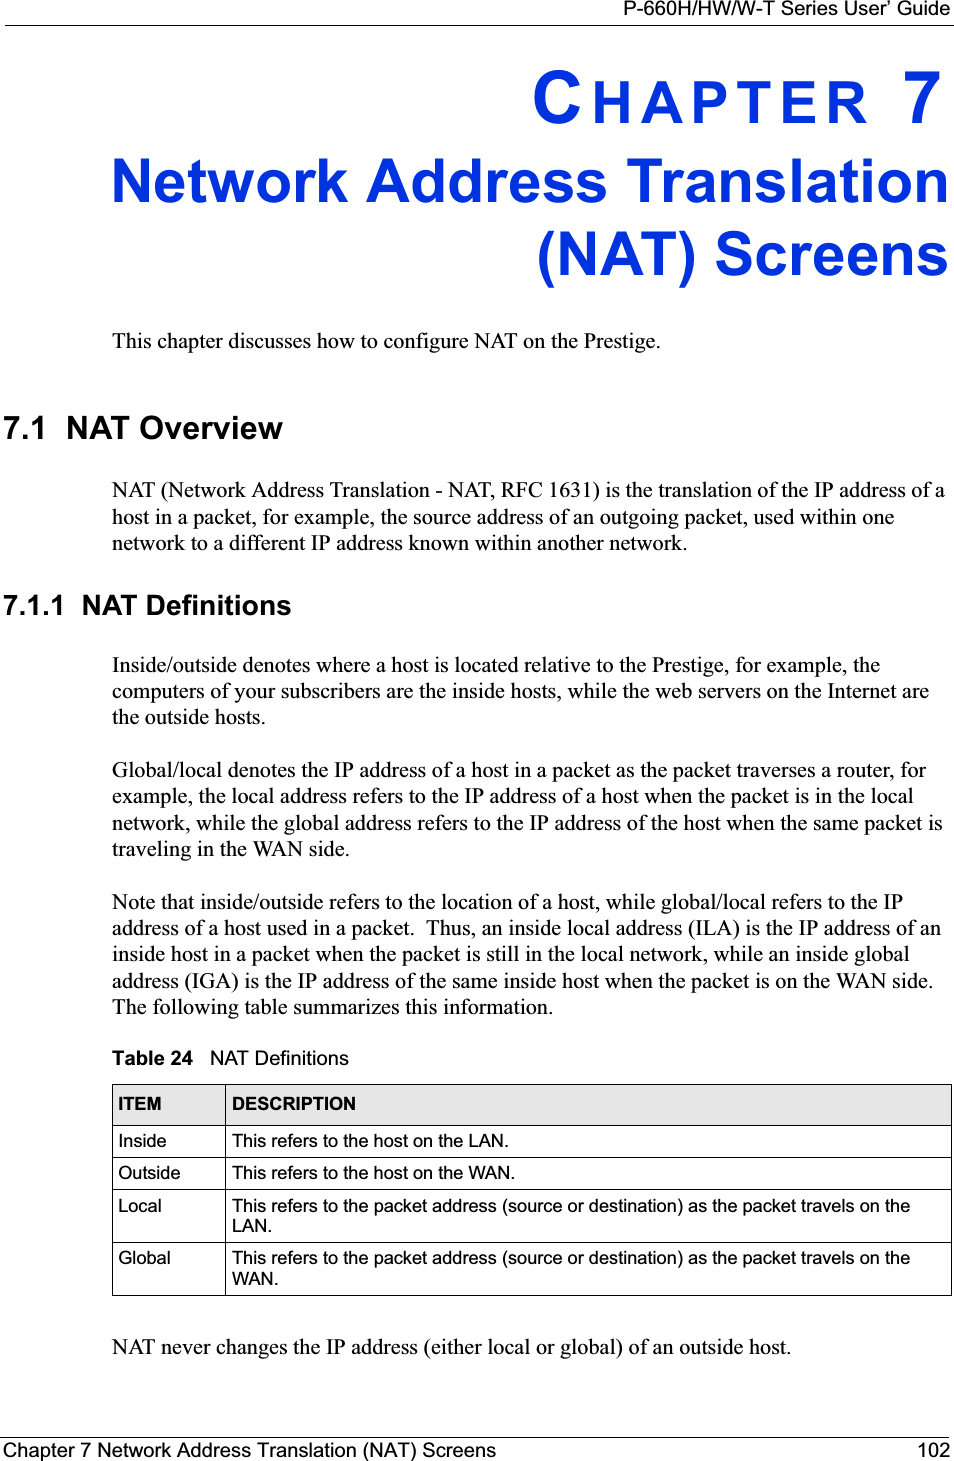 P-660H/HW/W-T Series User’ GuideChapter 7 Network Address Translation (NAT) Screens 102CHAPTER 7Network Address Translation(NAT) ScreensThis chapter discusses how to configure NAT on the Prestige.7.1  NAT Overview NAT (Network Address Translation - NAT, RFC 1631) is the translation of the IP address of a host in a packet, for example, the source address of an outgoing packet, used within one network to a different IP address known within another network. 7.1.1  NAT DefinitionsInside/outside denotes where a host is located relative to the Prestige, for example, the computers of your subscribers are the inside hosts, while the web servers on the Internet are the outside hosts. Global/local denotes the IP address of a host in a packet as the packet traverses a router, for example, the local address refers to the IP address of a host when the packet is in the local network, while the global address refers to the IP address of the host when the same packet is traveling in the WAN side. Note that inside/outside refers to the location of a host, while global/local refers to the IP address of a host used in a packet.  Thus, an inside local address (ILA) is the IP address of an inside host in a packet when the packet is still in the local network, while an inside global address (IGA) is the IP address of the same inside host when the packet is on the WAN side. The following table summarizes this information.NAT never changes the IP address (either local or global) of an outside host.Table 24   NAT DefinitionsITEM DESCRIPTIONInside This refers to the host on the LAN.Outside This refers to the host on the WAN.Local This refers to the packet address (source or destination) as the packet travels on the LAN.Global This refers to the packet address (source or destination) as the packet travels on the WAN.